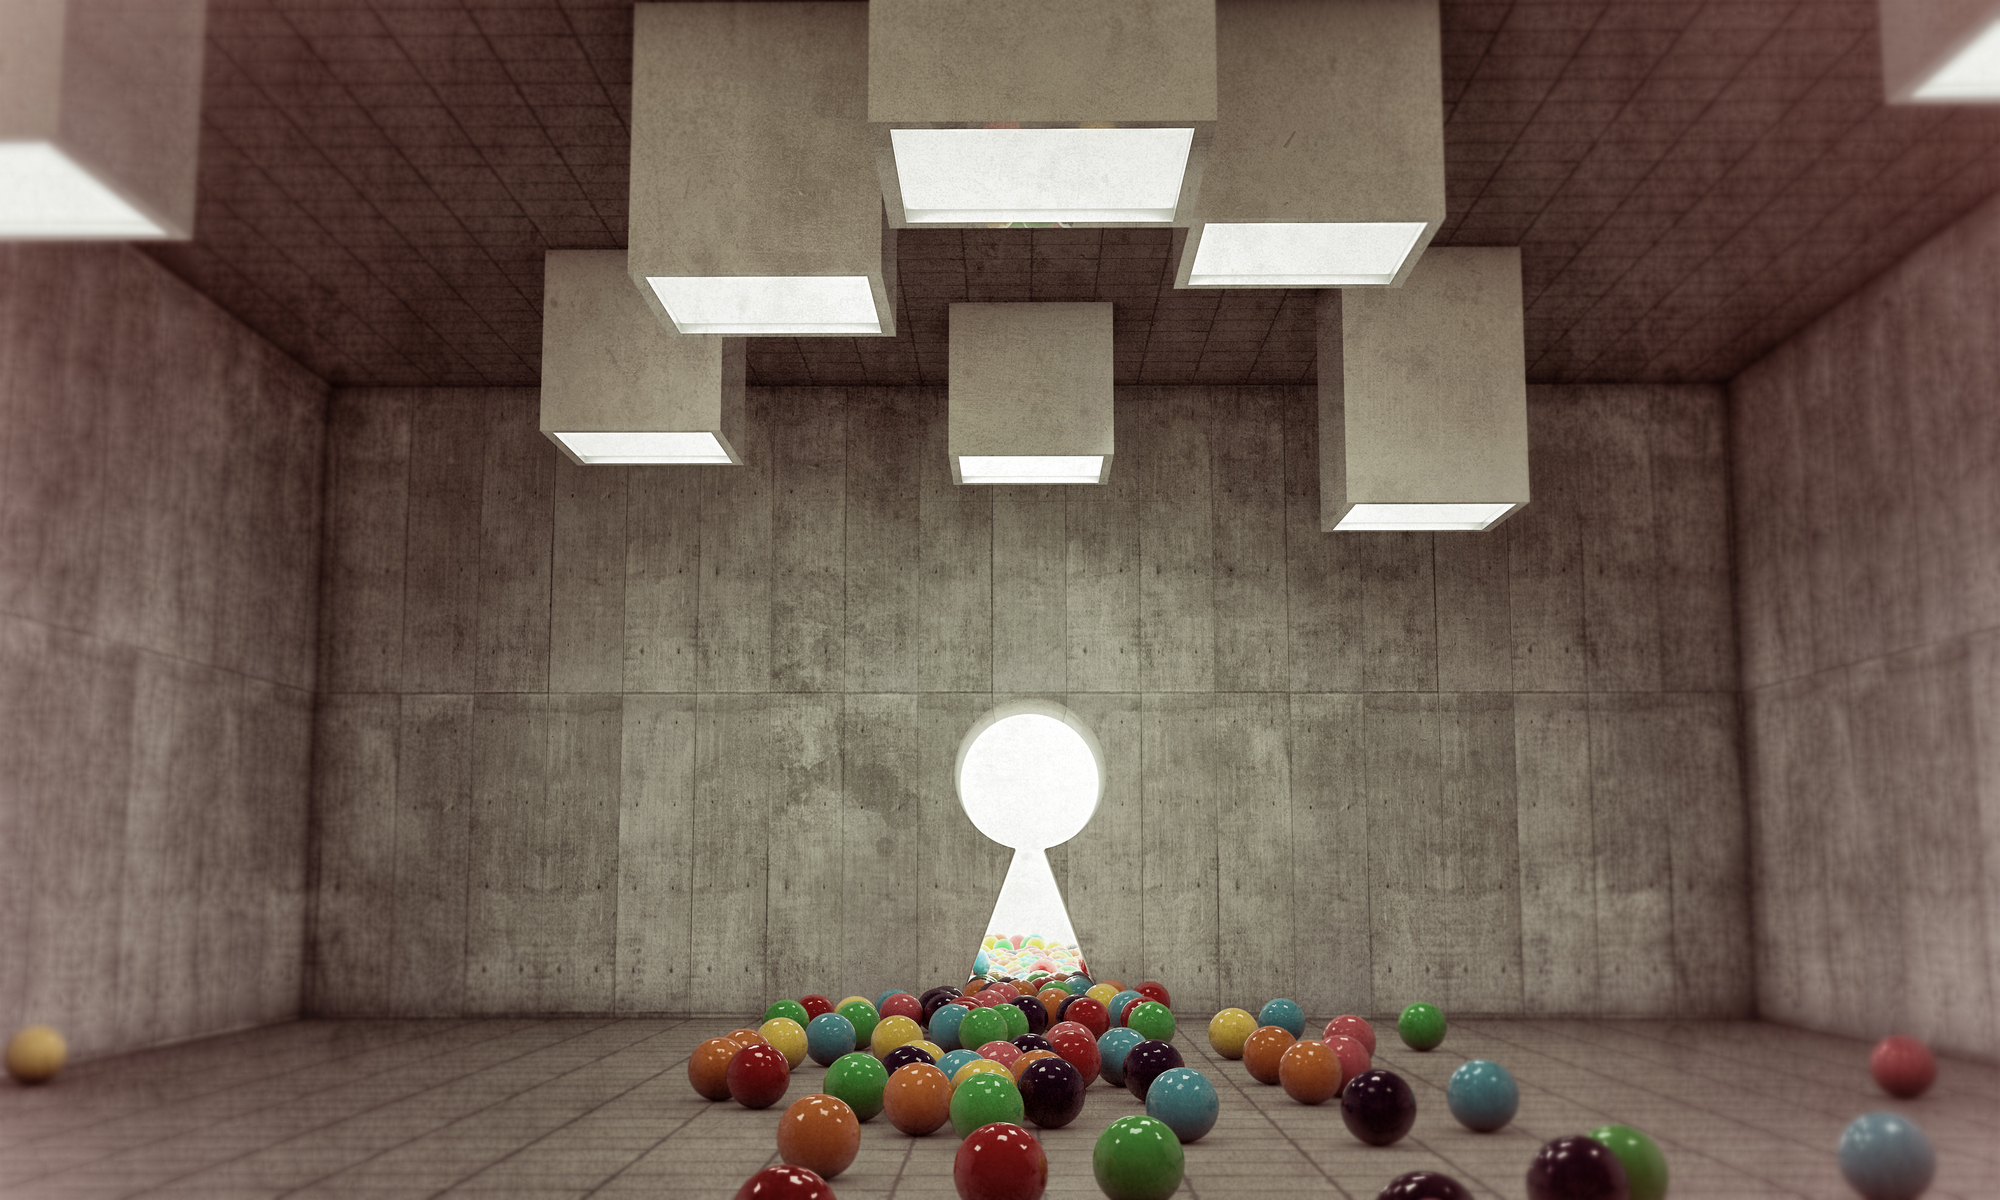 Assorted balls of different colors on the floor of a spacious white room with large keyhole window leading to the outdoors